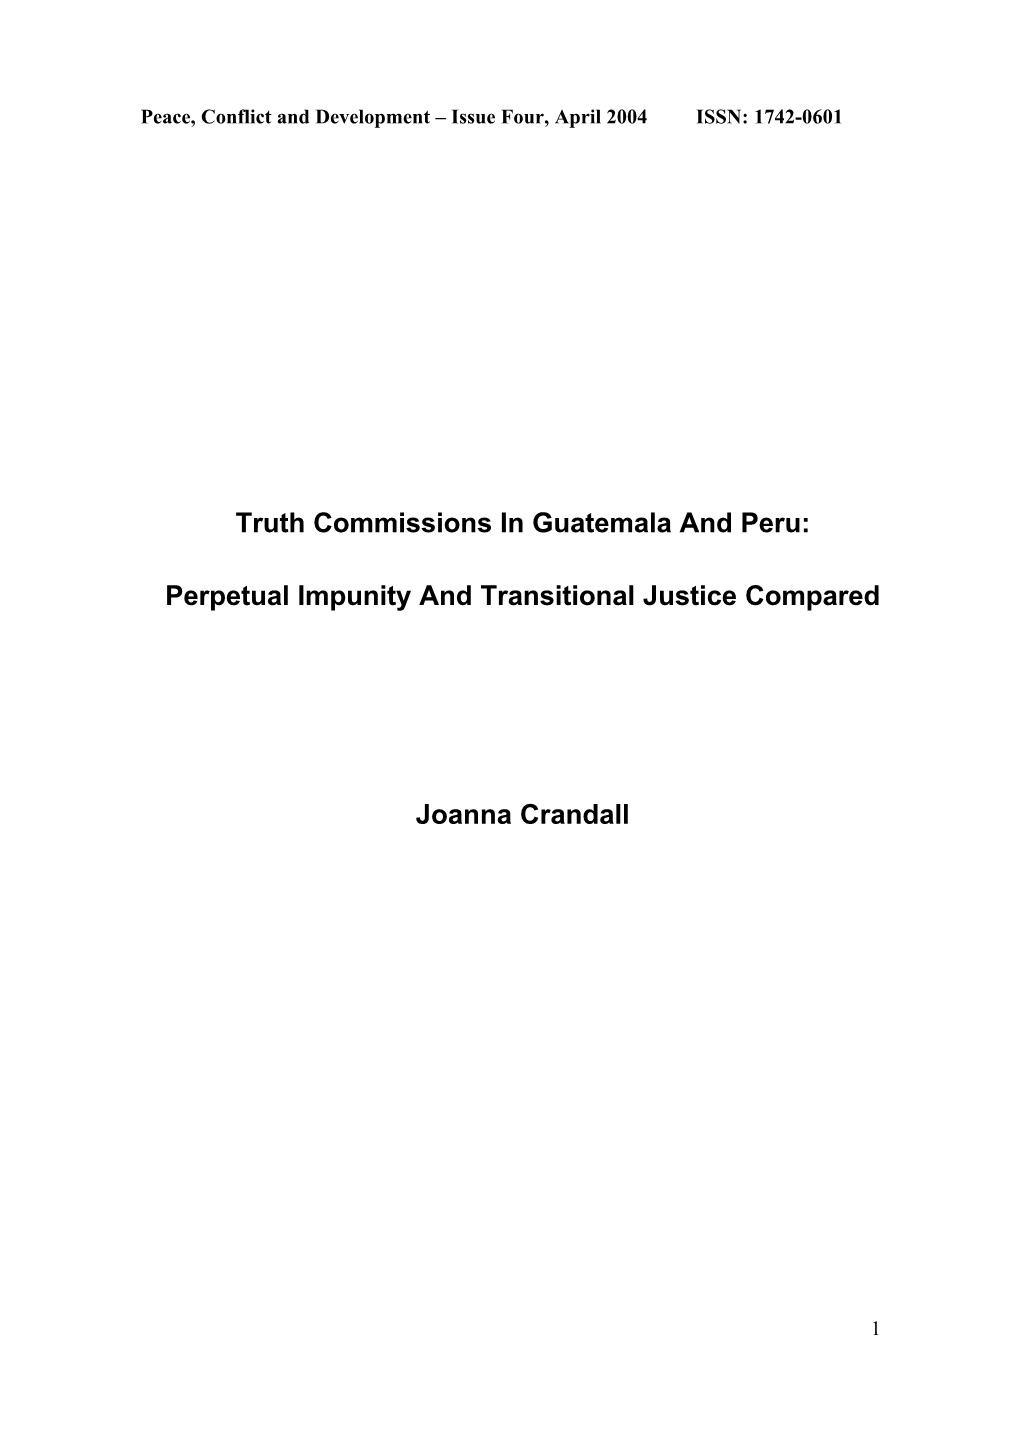 Truth Commissions in Guatemala and Peru: Perpetual Impunity and Transitional Justice Compared Joanna Crandall